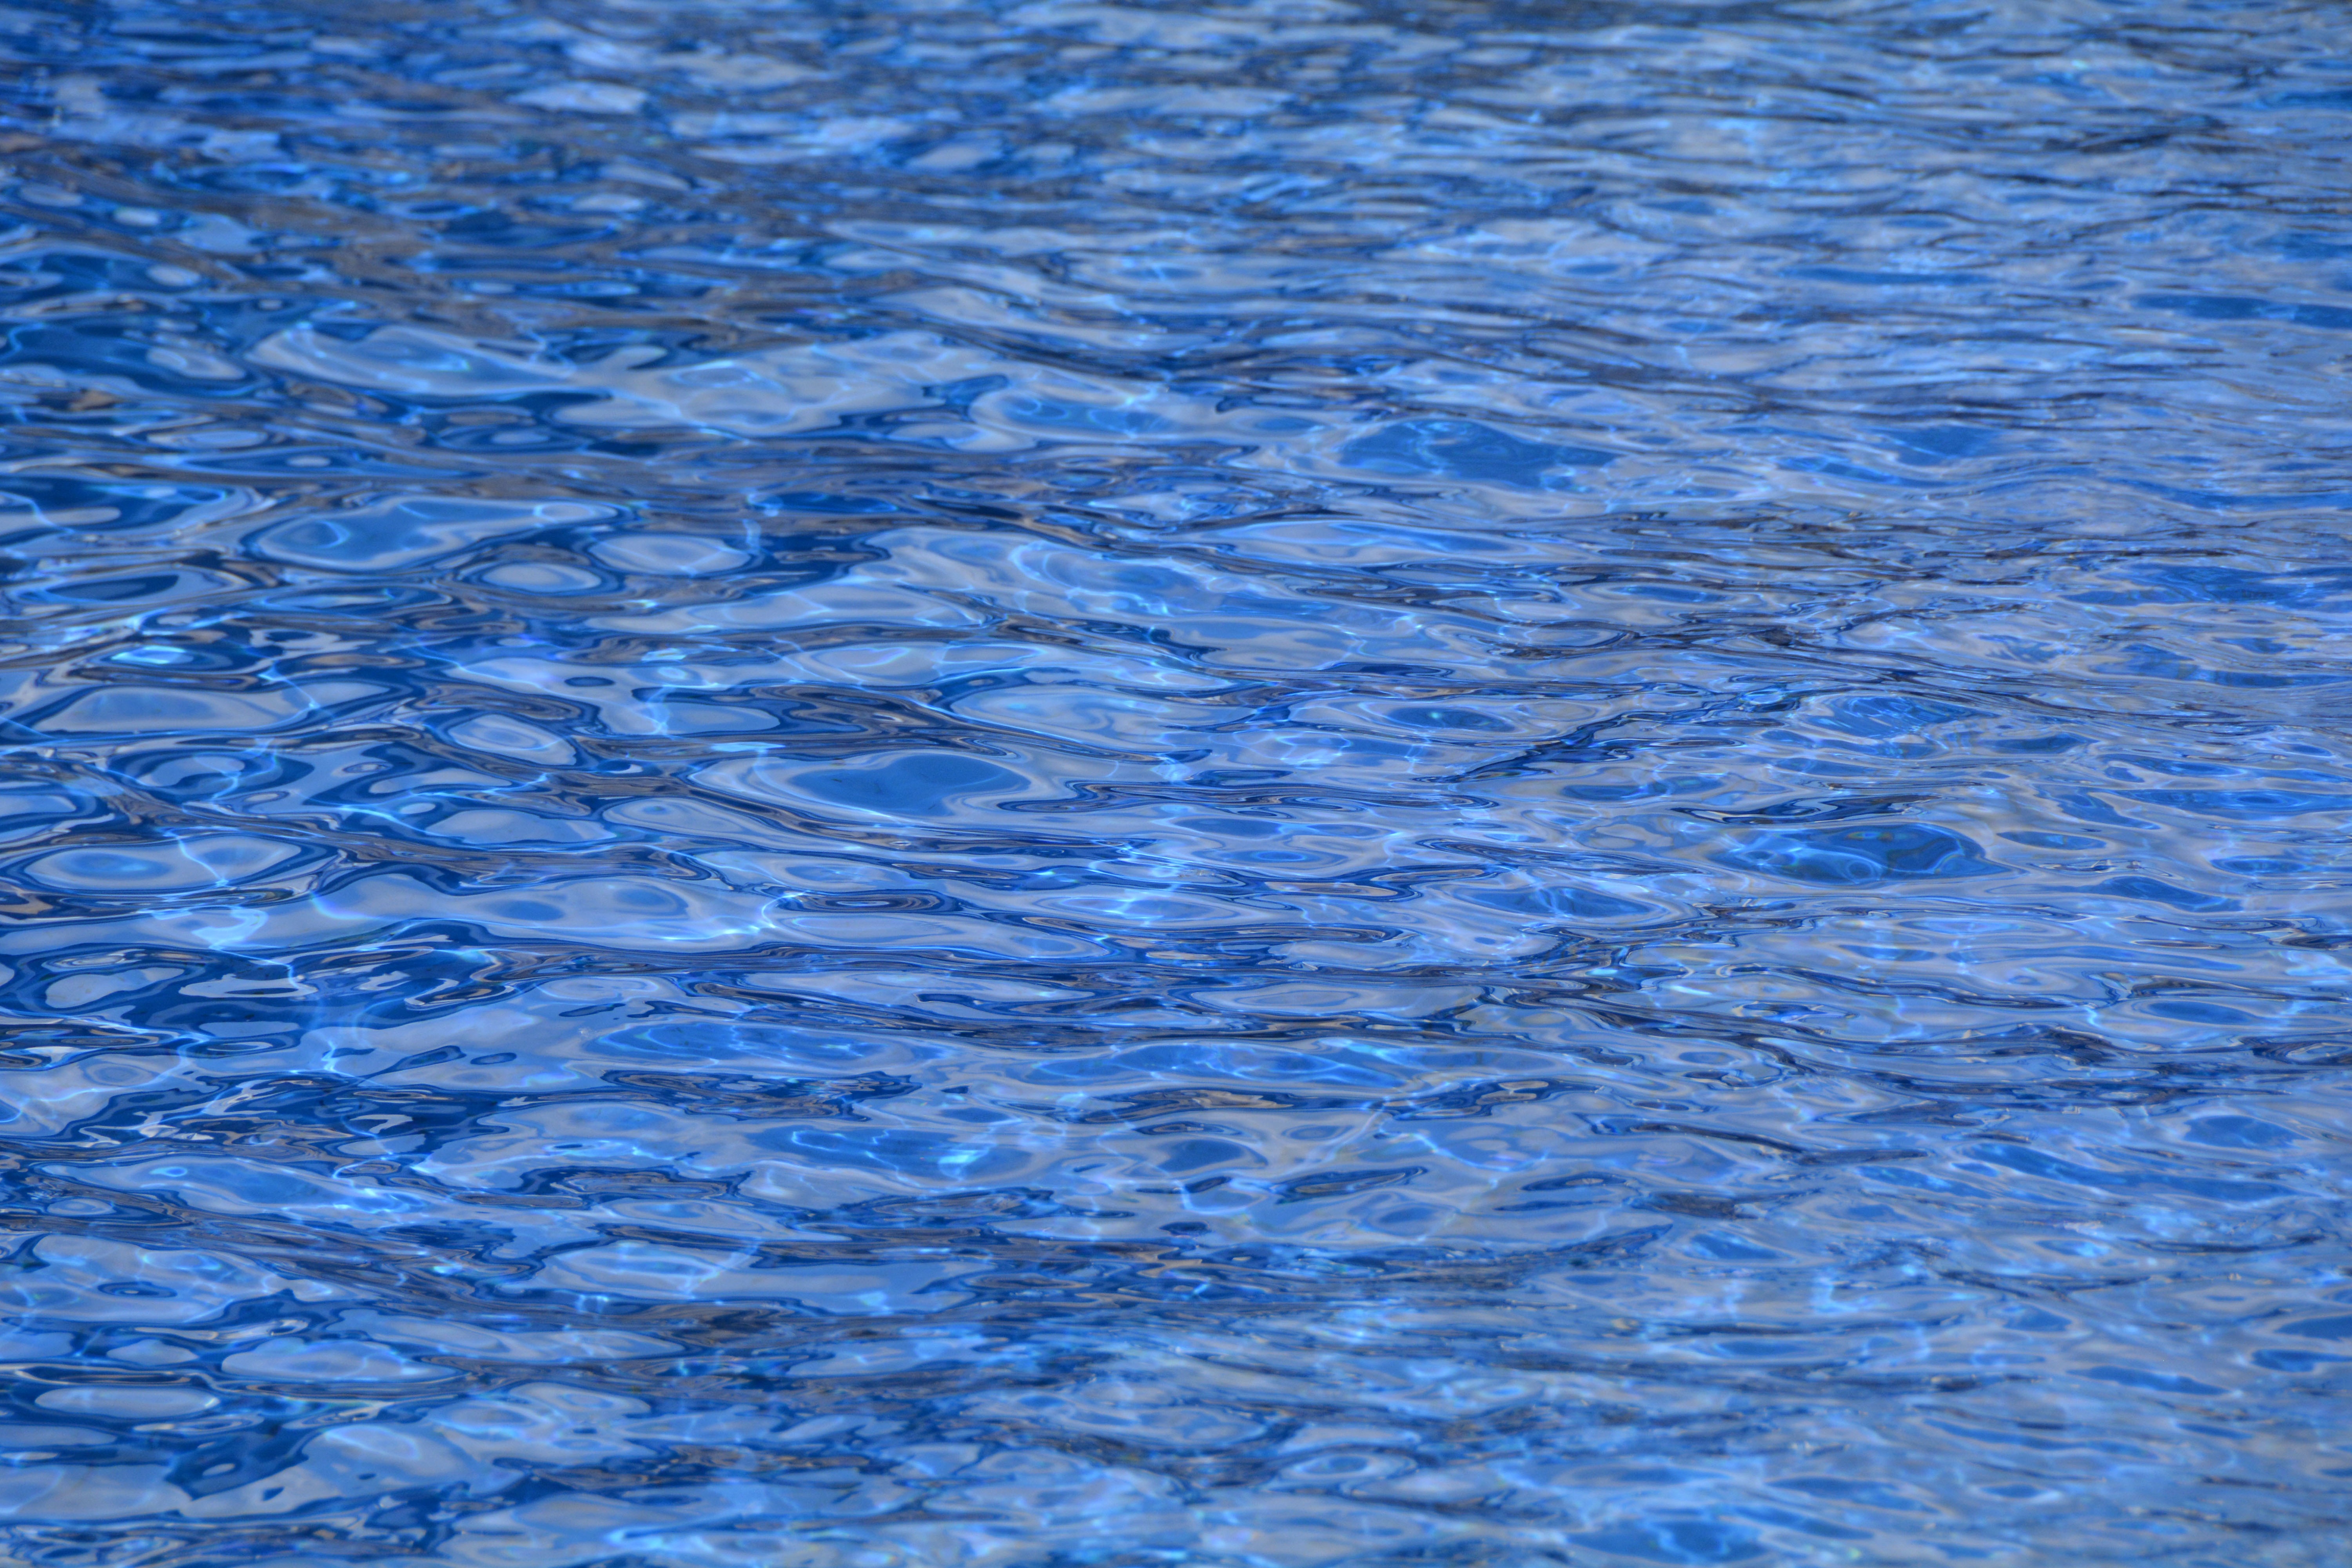 blue, ripples, water, textures, ripple, texture, surface, wavy, saturated